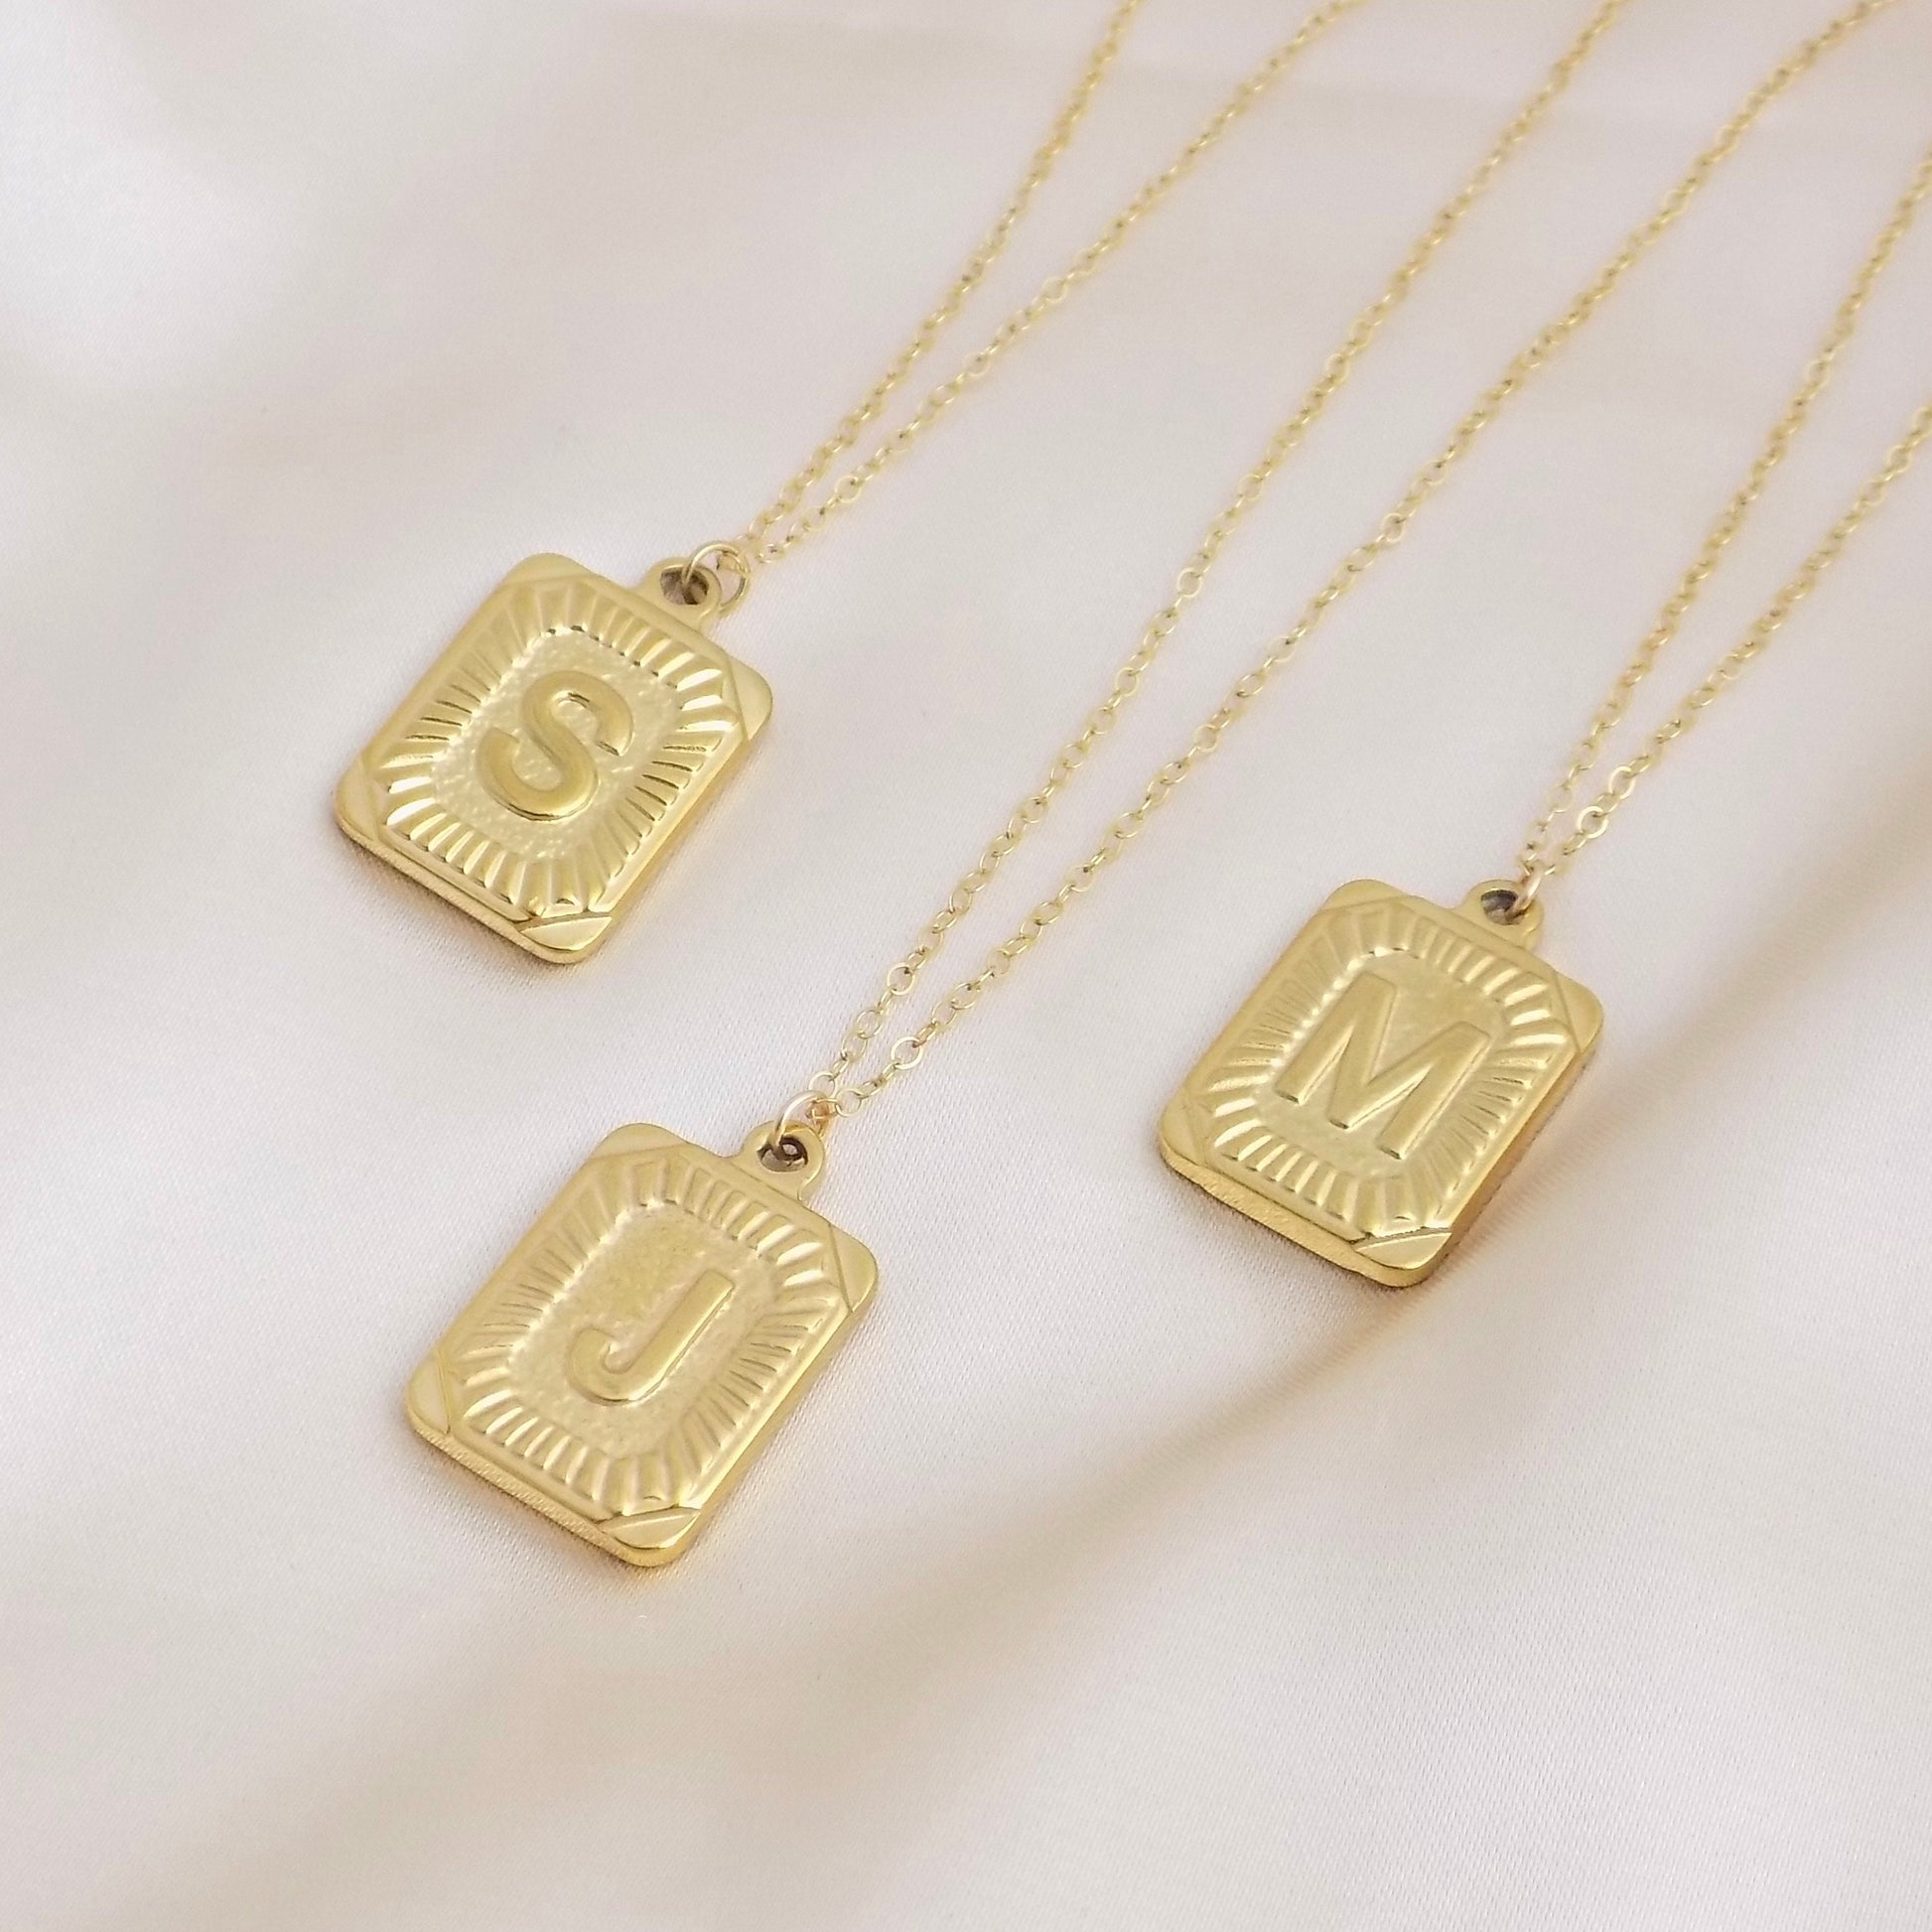 Large Tag Necklace Gold, Initial Charm, Tag Initial Pendant, 18K Stainless Steel or 14K Gold Filled, Personalized Layering Women, M6-133